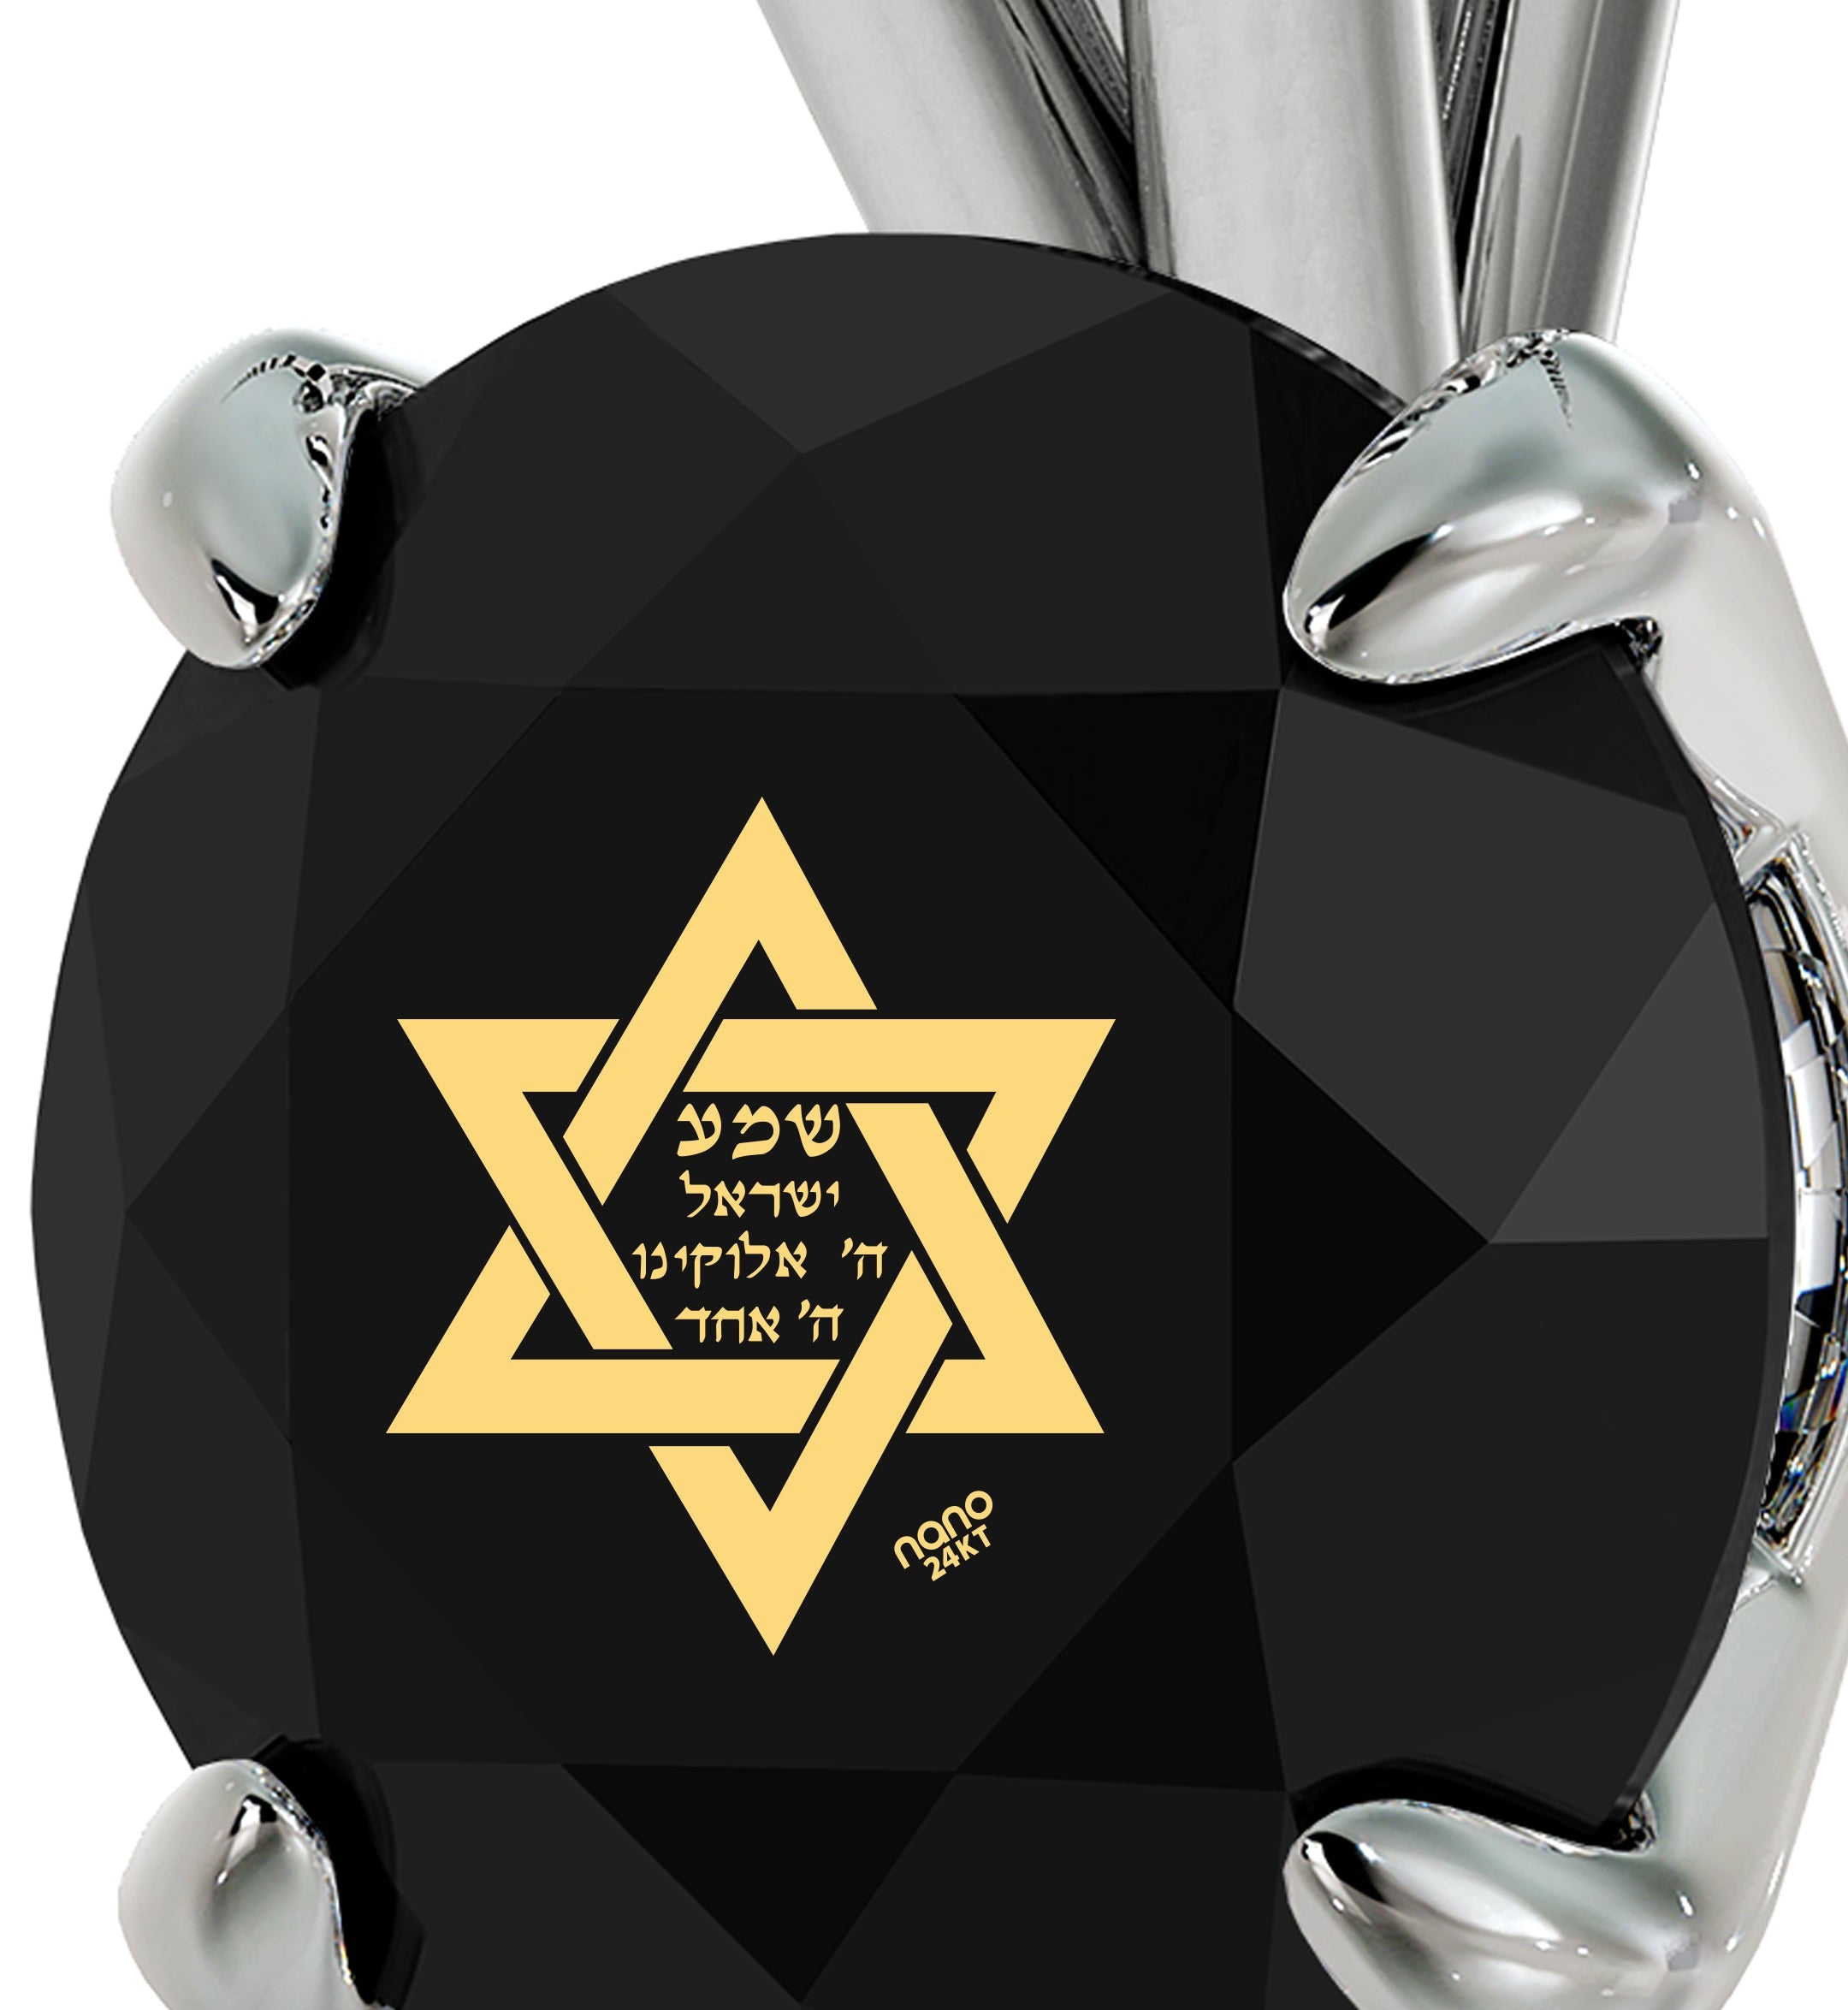 A robot hand holding a black heart with a 925 Sterling Silver Star of David and Hebrew text on a Swarovski crystal necklace inscribed with Shema Israel.